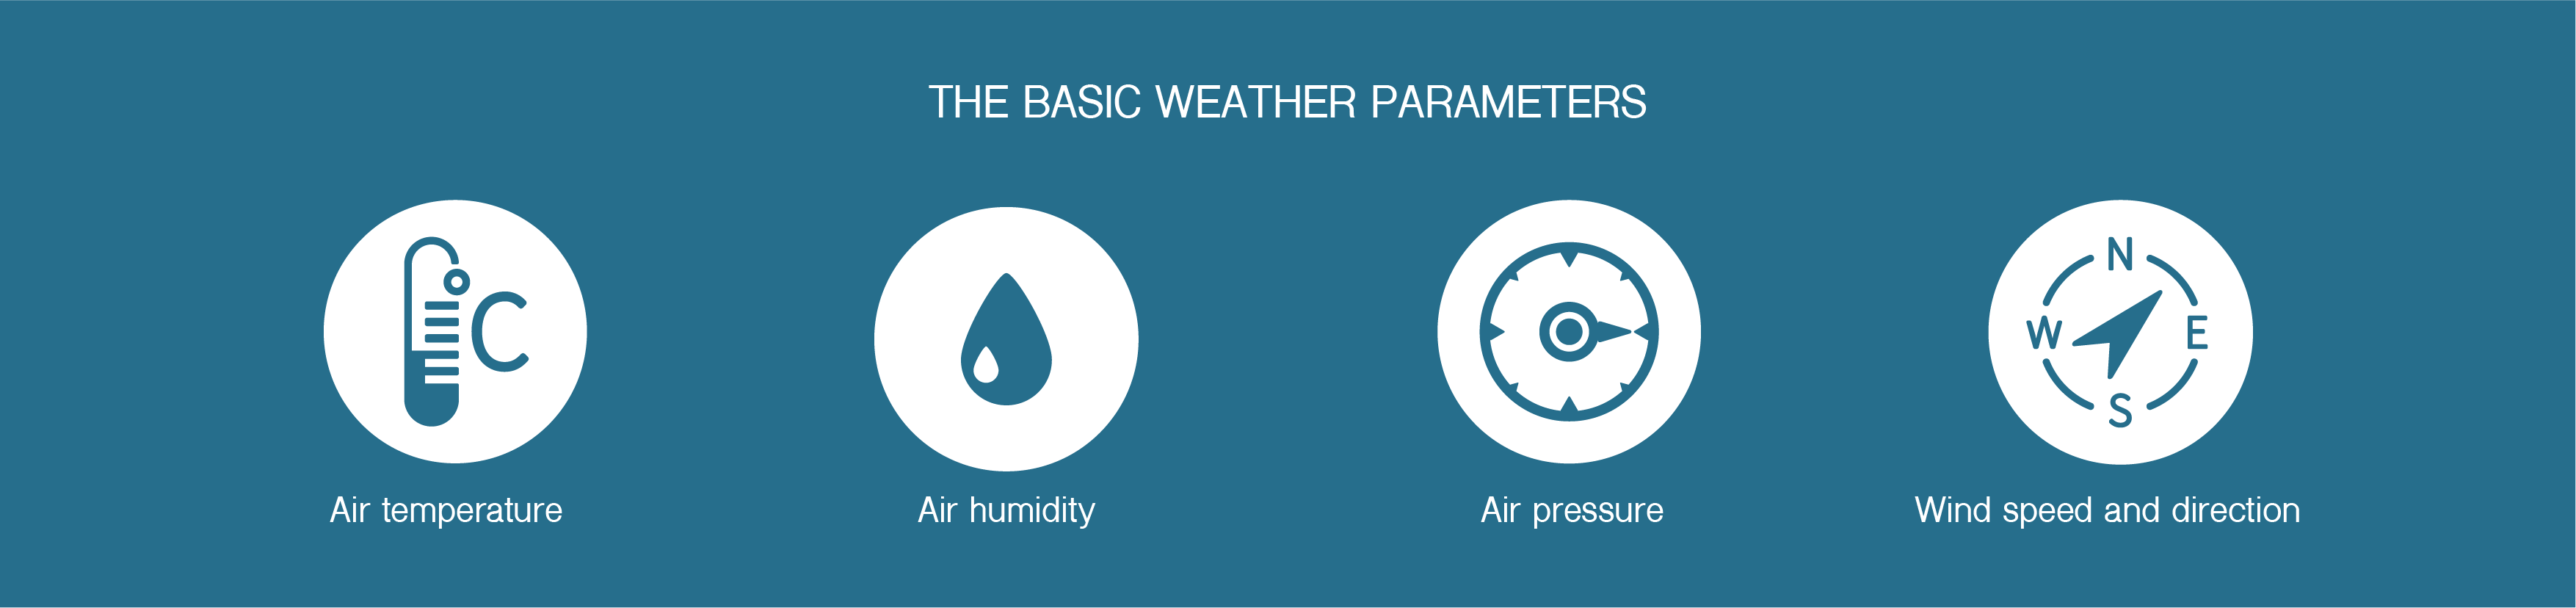 The-basic-weather-parameters